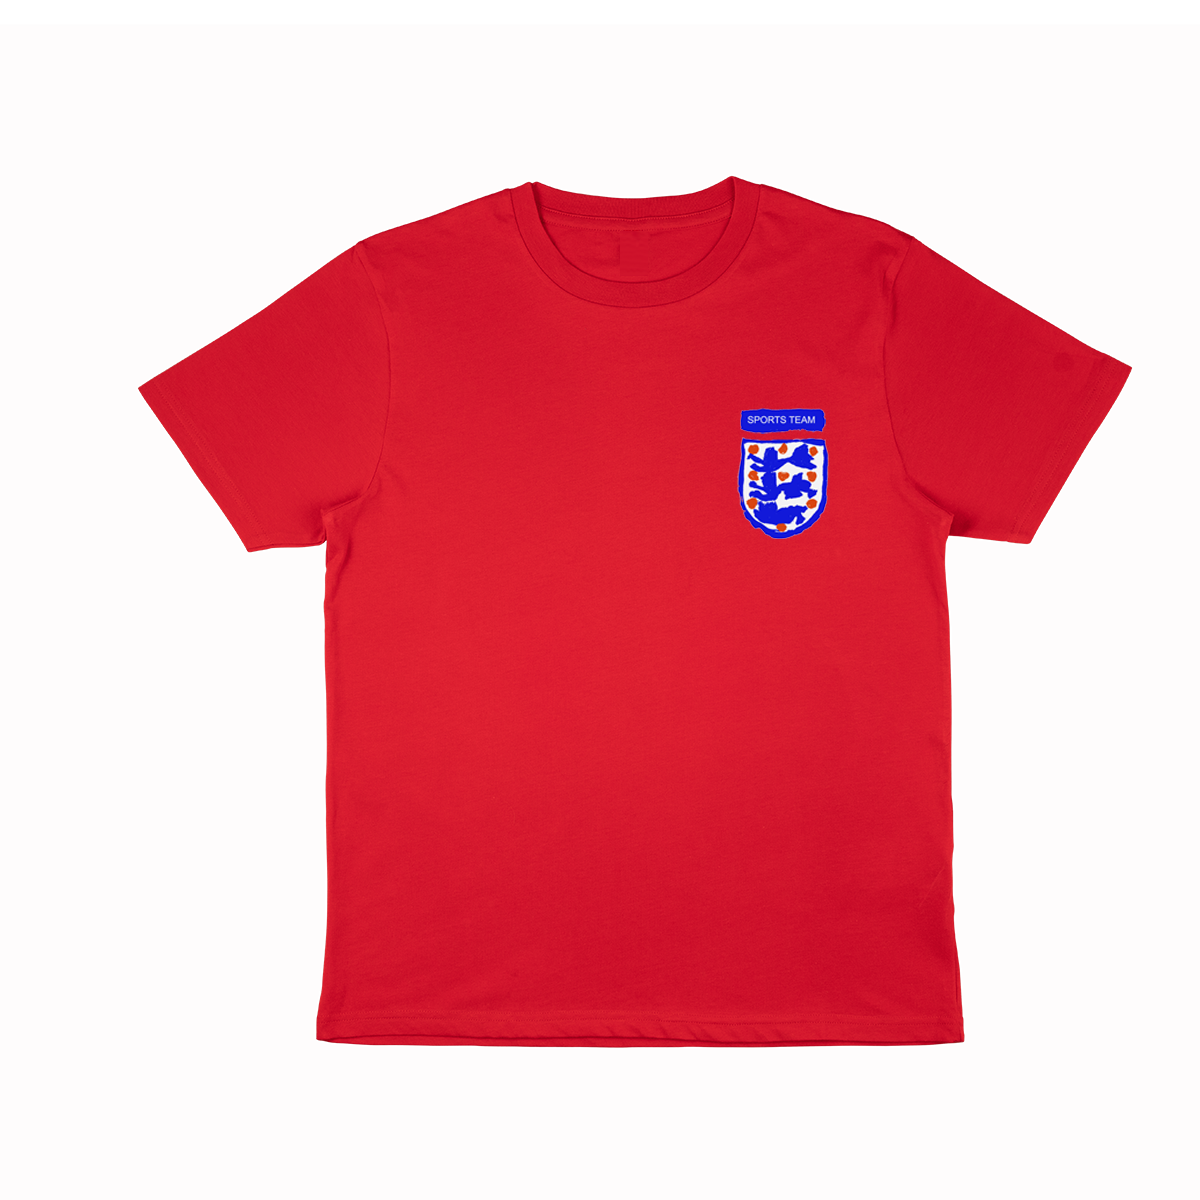 Sports Team - England Red Tee - Limited Edition